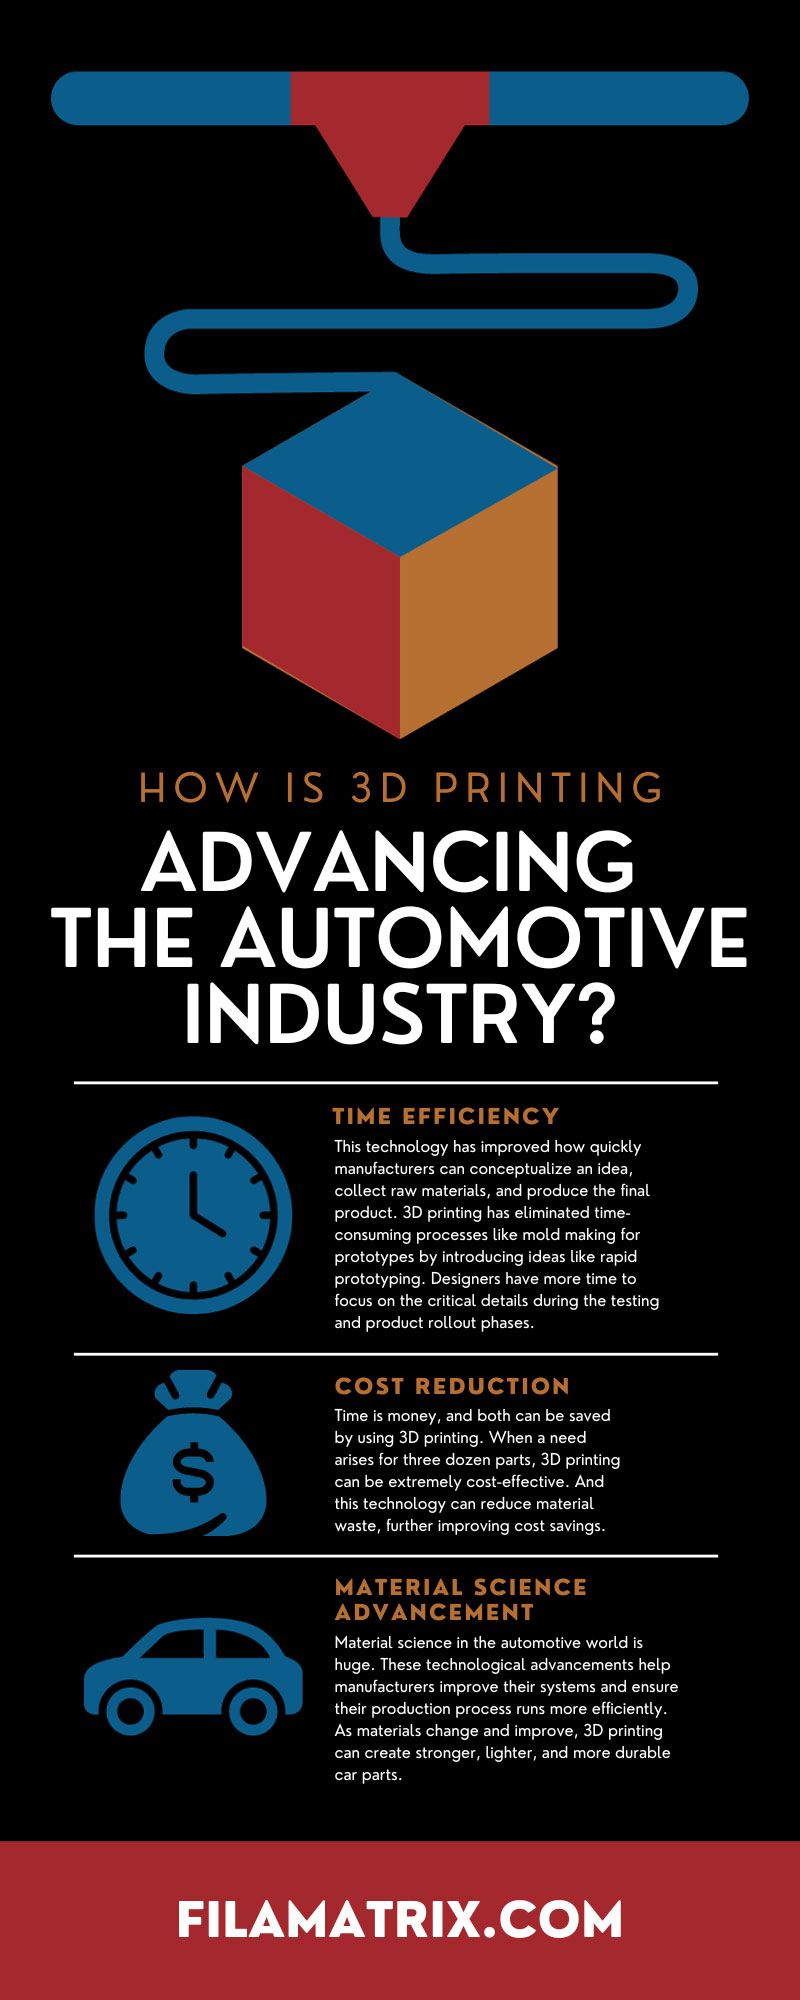 How Is 3D Printing Advancing the Automotive Industry?